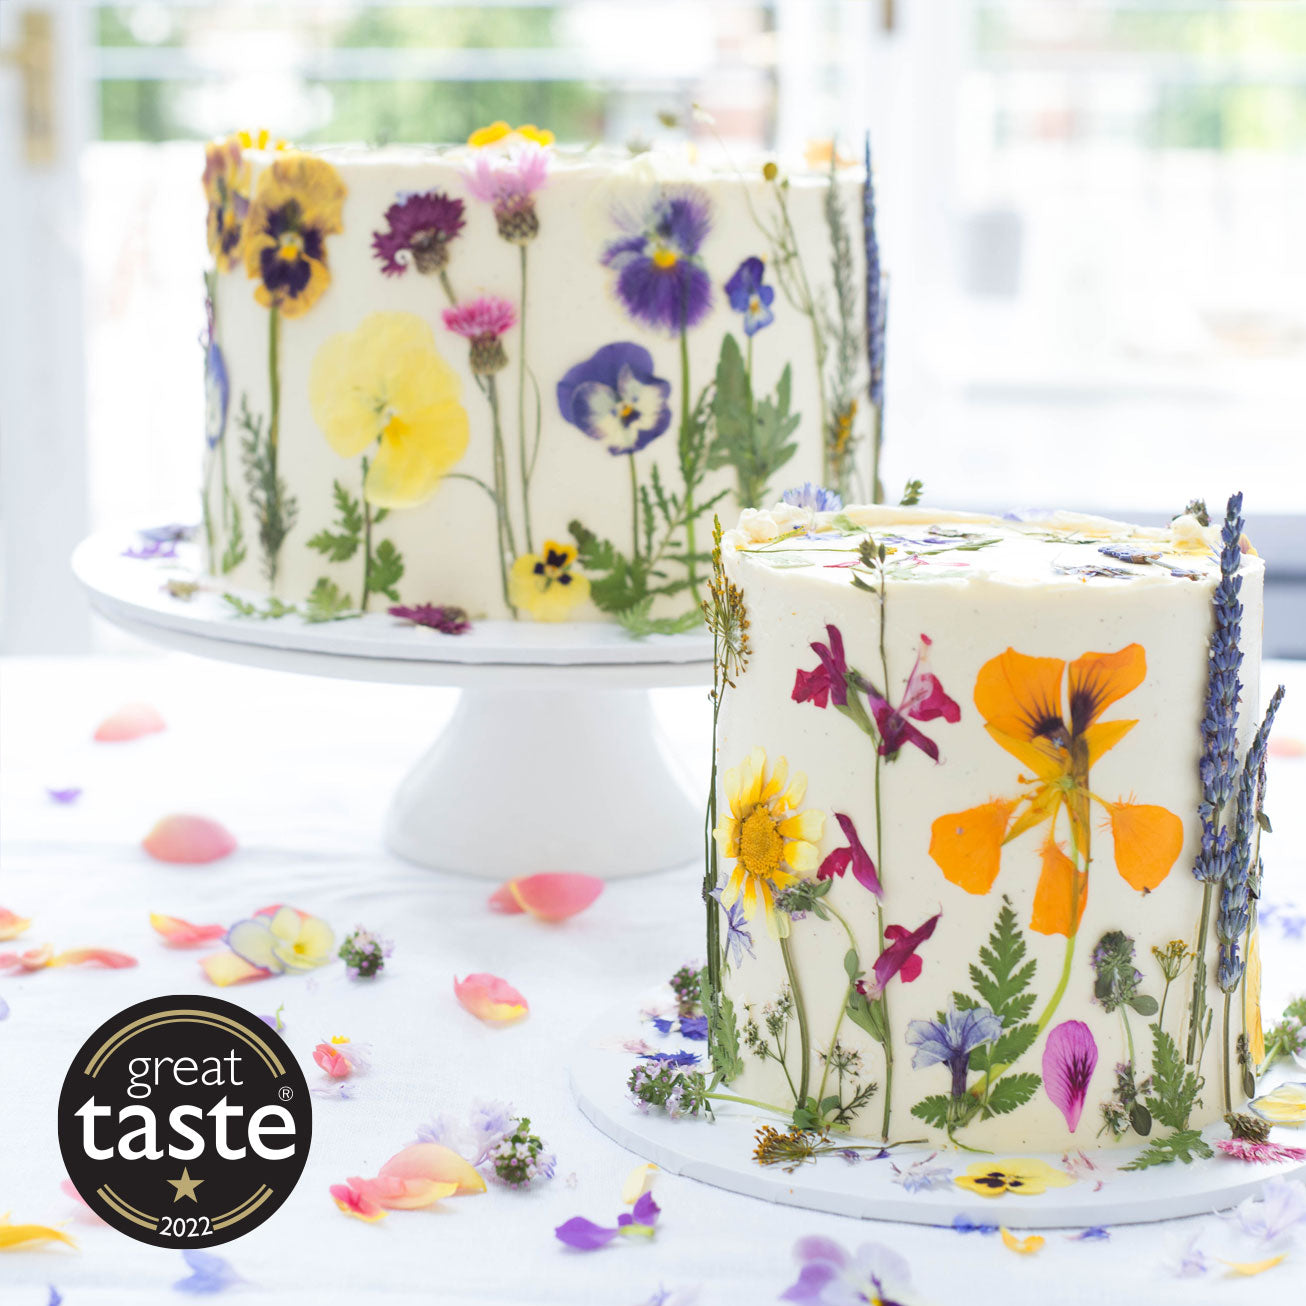 Learn How To Make A Pressed Edible Flower Cake - Sow ʼn Sow